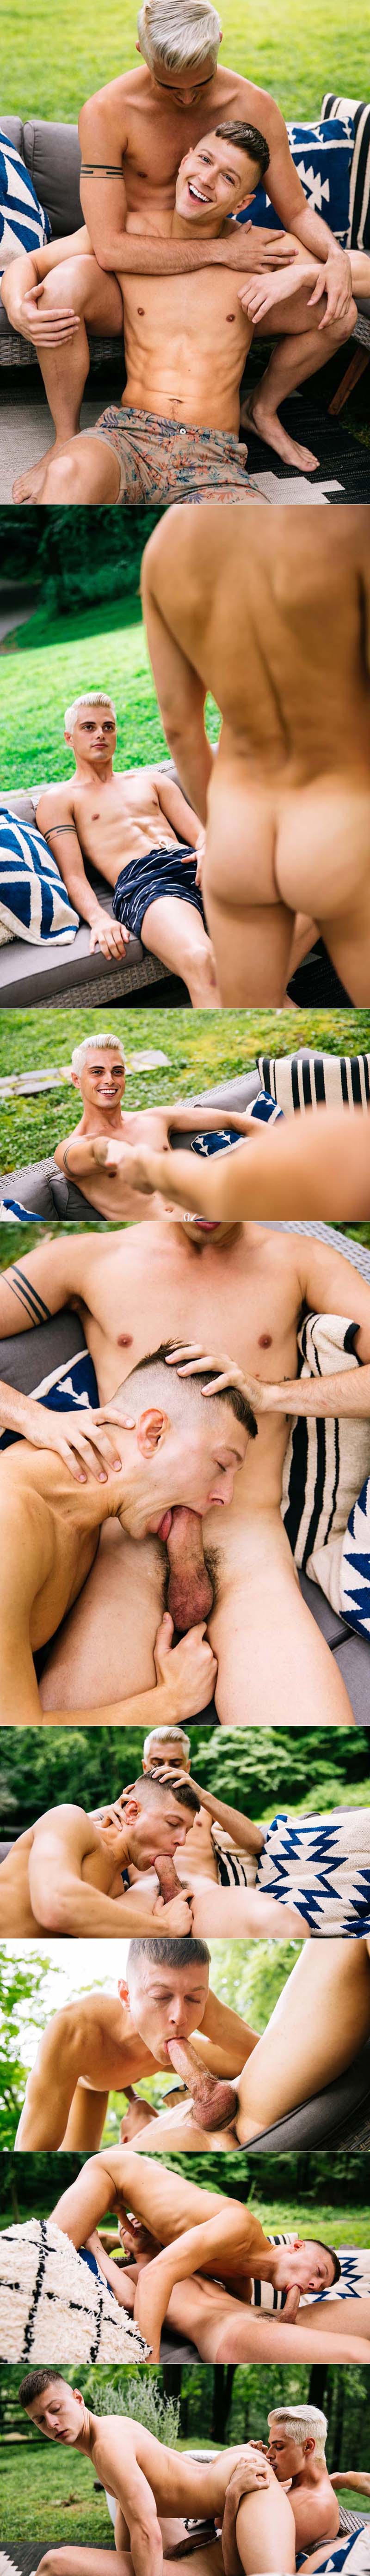 Austin Avery and Ben Masters Flip-Fuck at CockyBoys.com